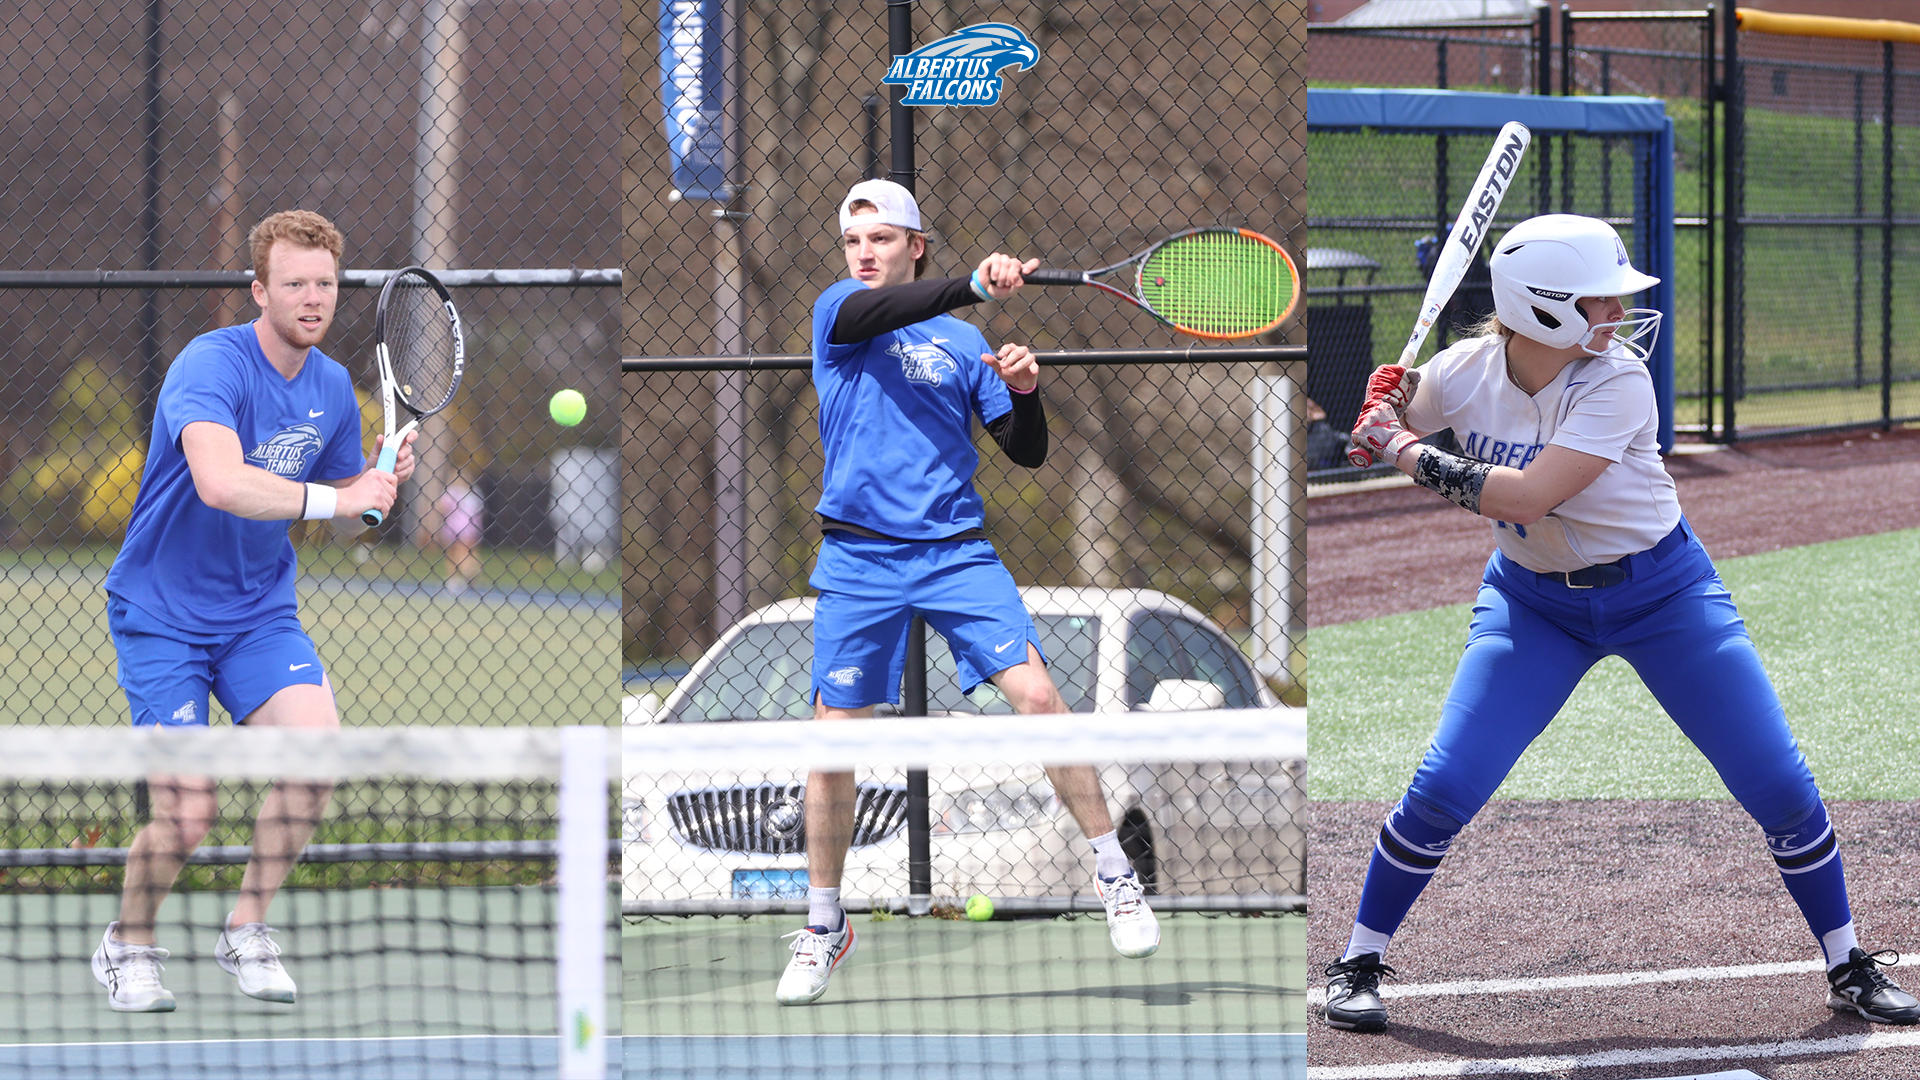 Men's Tennis Duo Chamanday and Silver and Softball's Edwards Recognized in Falcon Spotlight